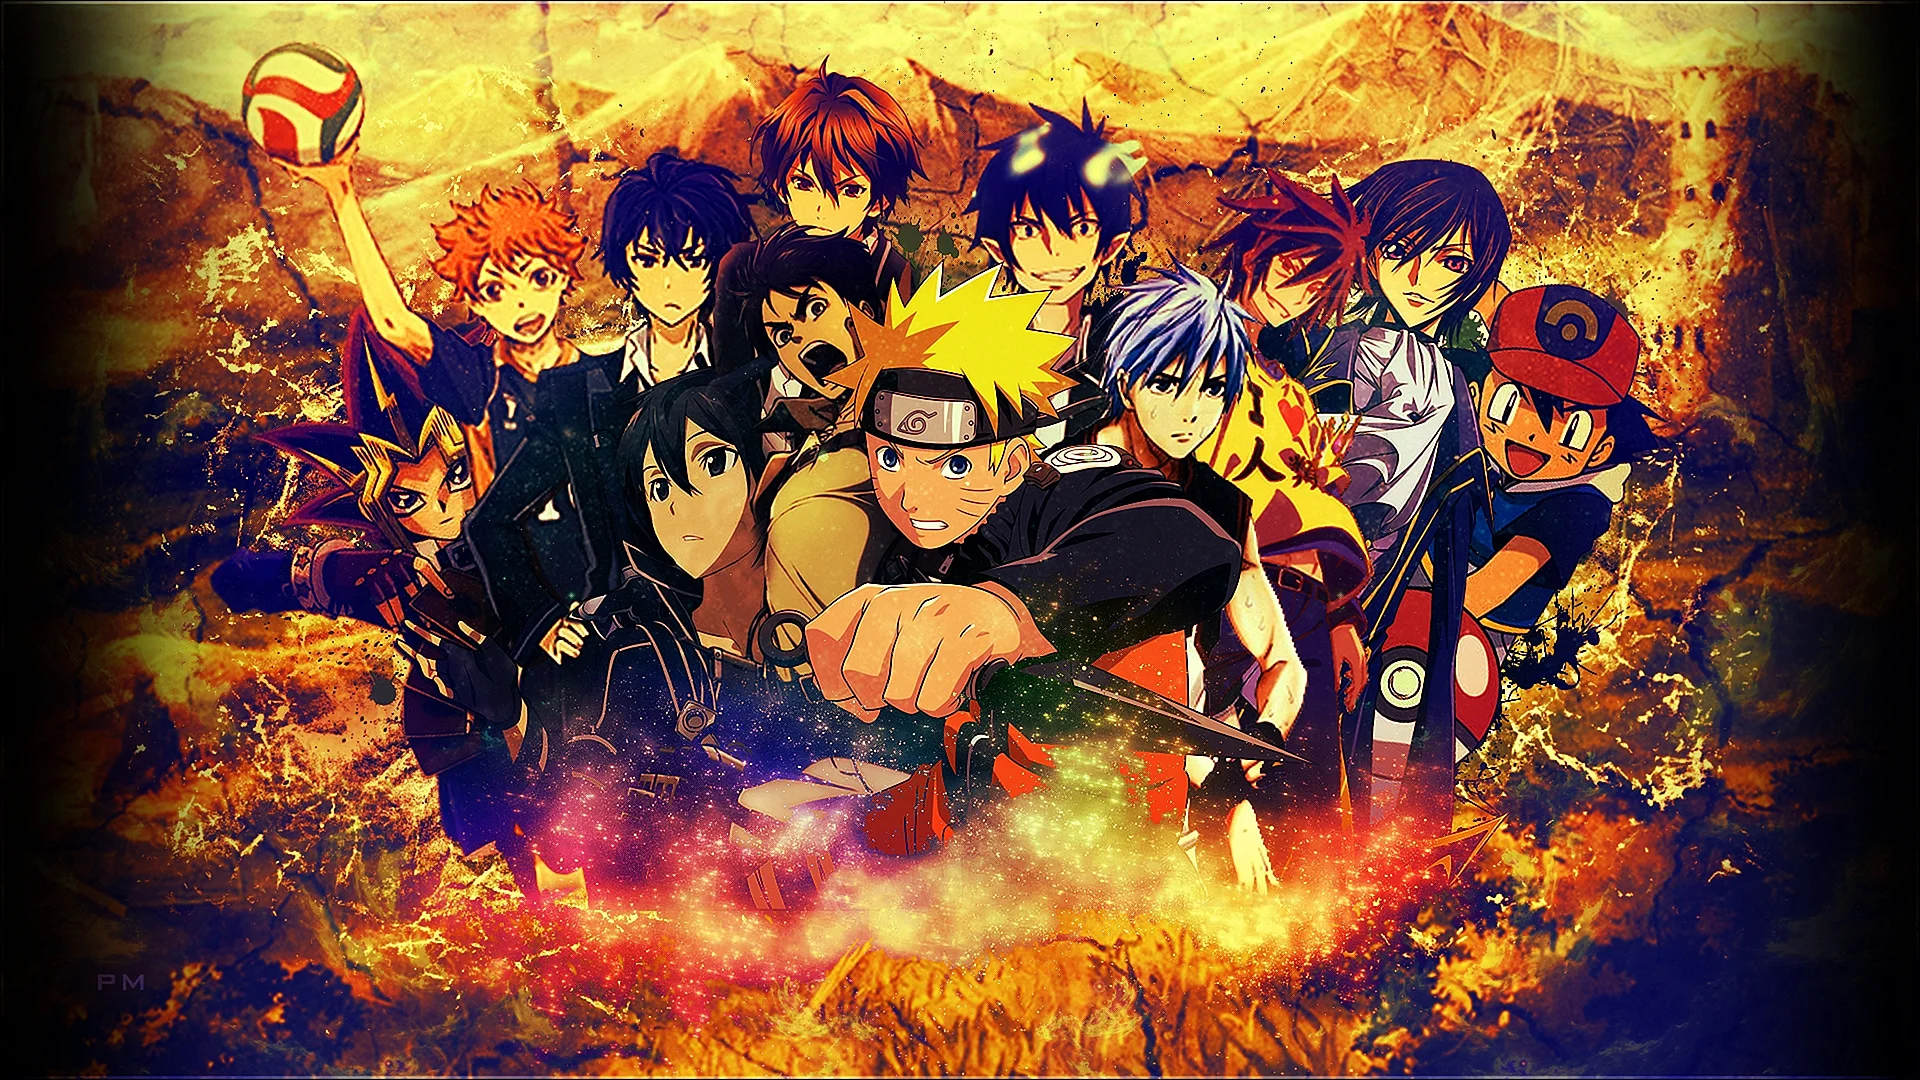 Anime Banner Wallpapers - Free Anime Banner Backgrounds - WallpapersHigh